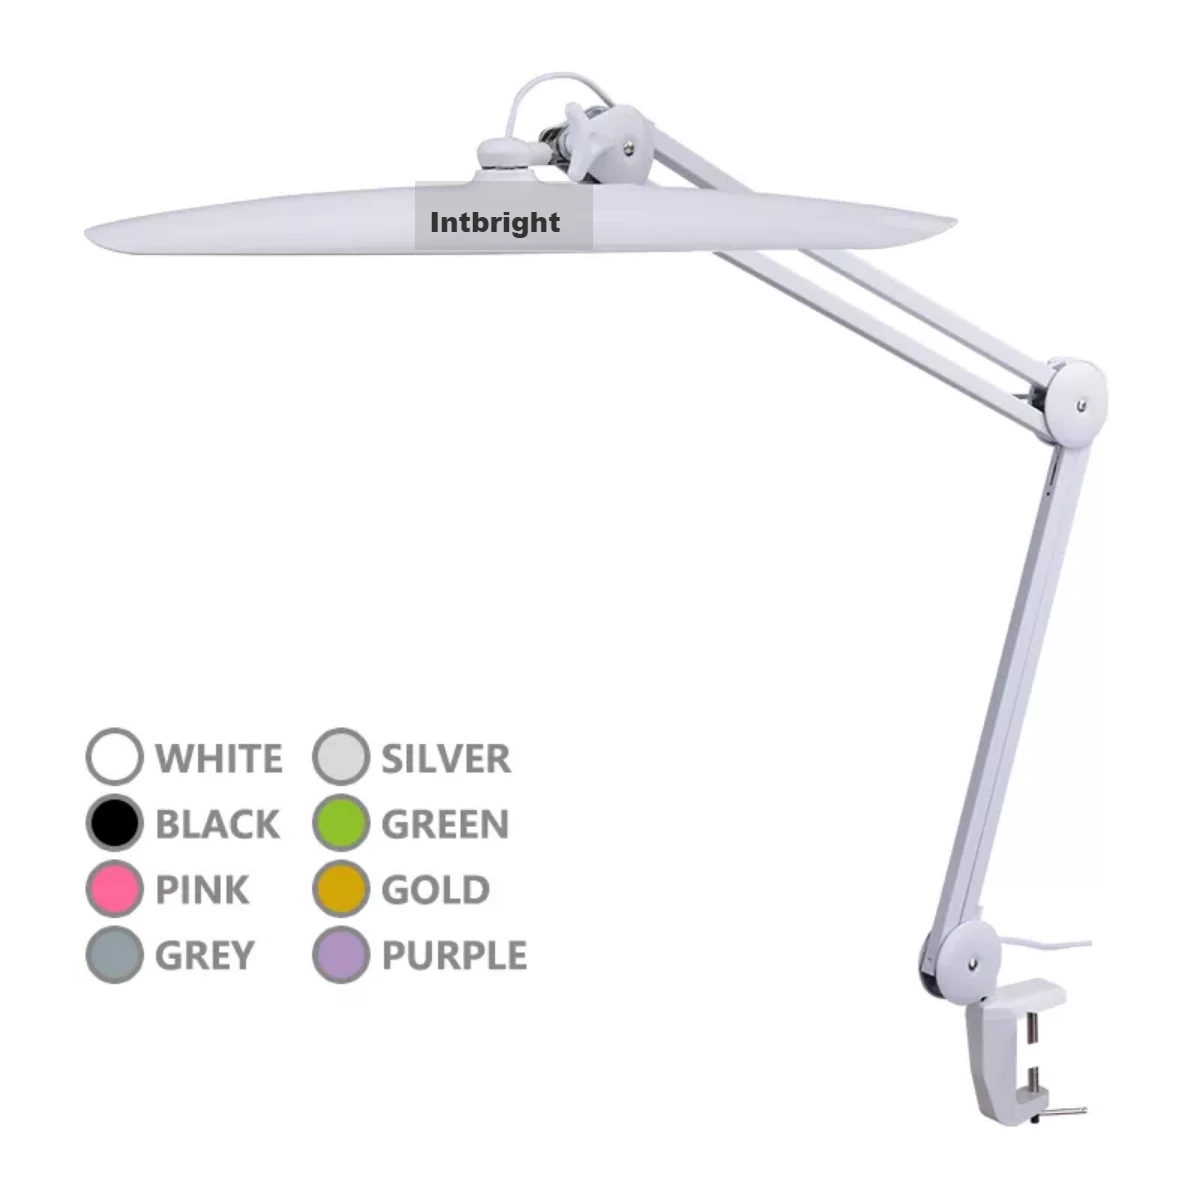 9501LED 24W Dimmable Desk Clamp Task Working Lamp, Super Bright Desk Lamp with Clamp, Highly Adjustable Office Light